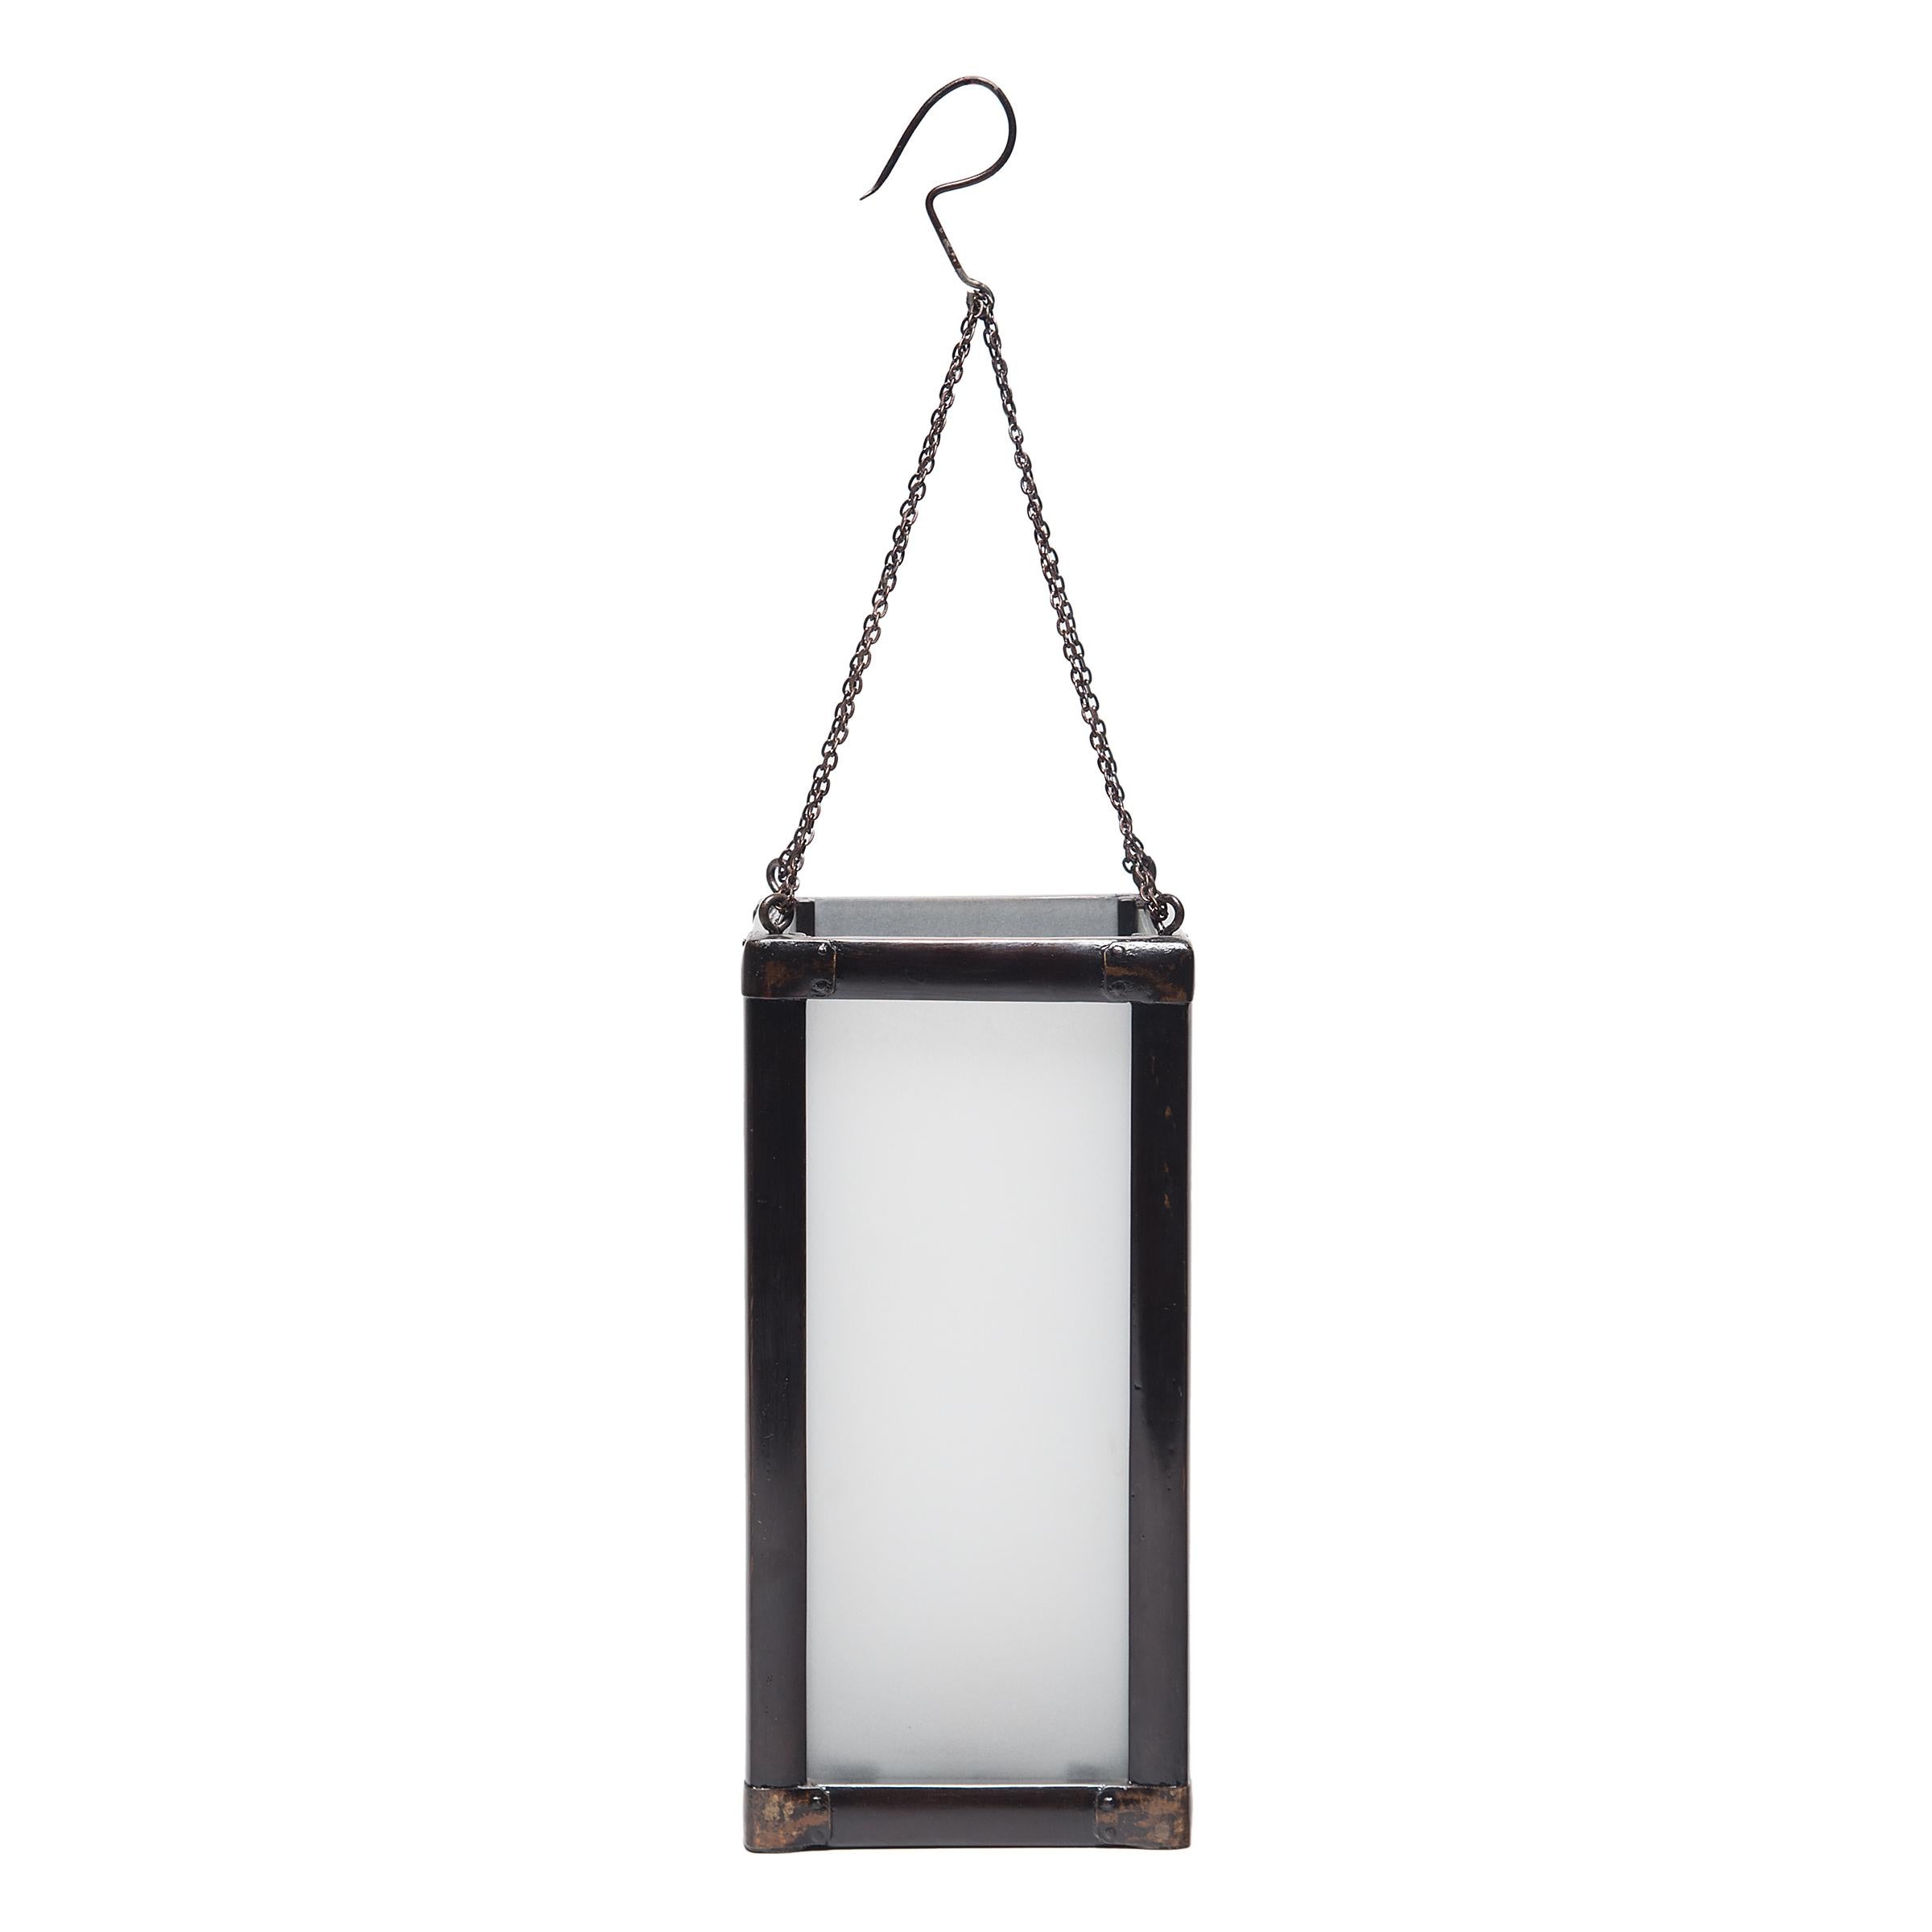 Framed in blackwood, this 19th century square lantern casts a soft glow through frosted glass. Displaying the refined simplicity found in furniture of the same era, the lantern illuminates modern interiors with spare form that has only become more